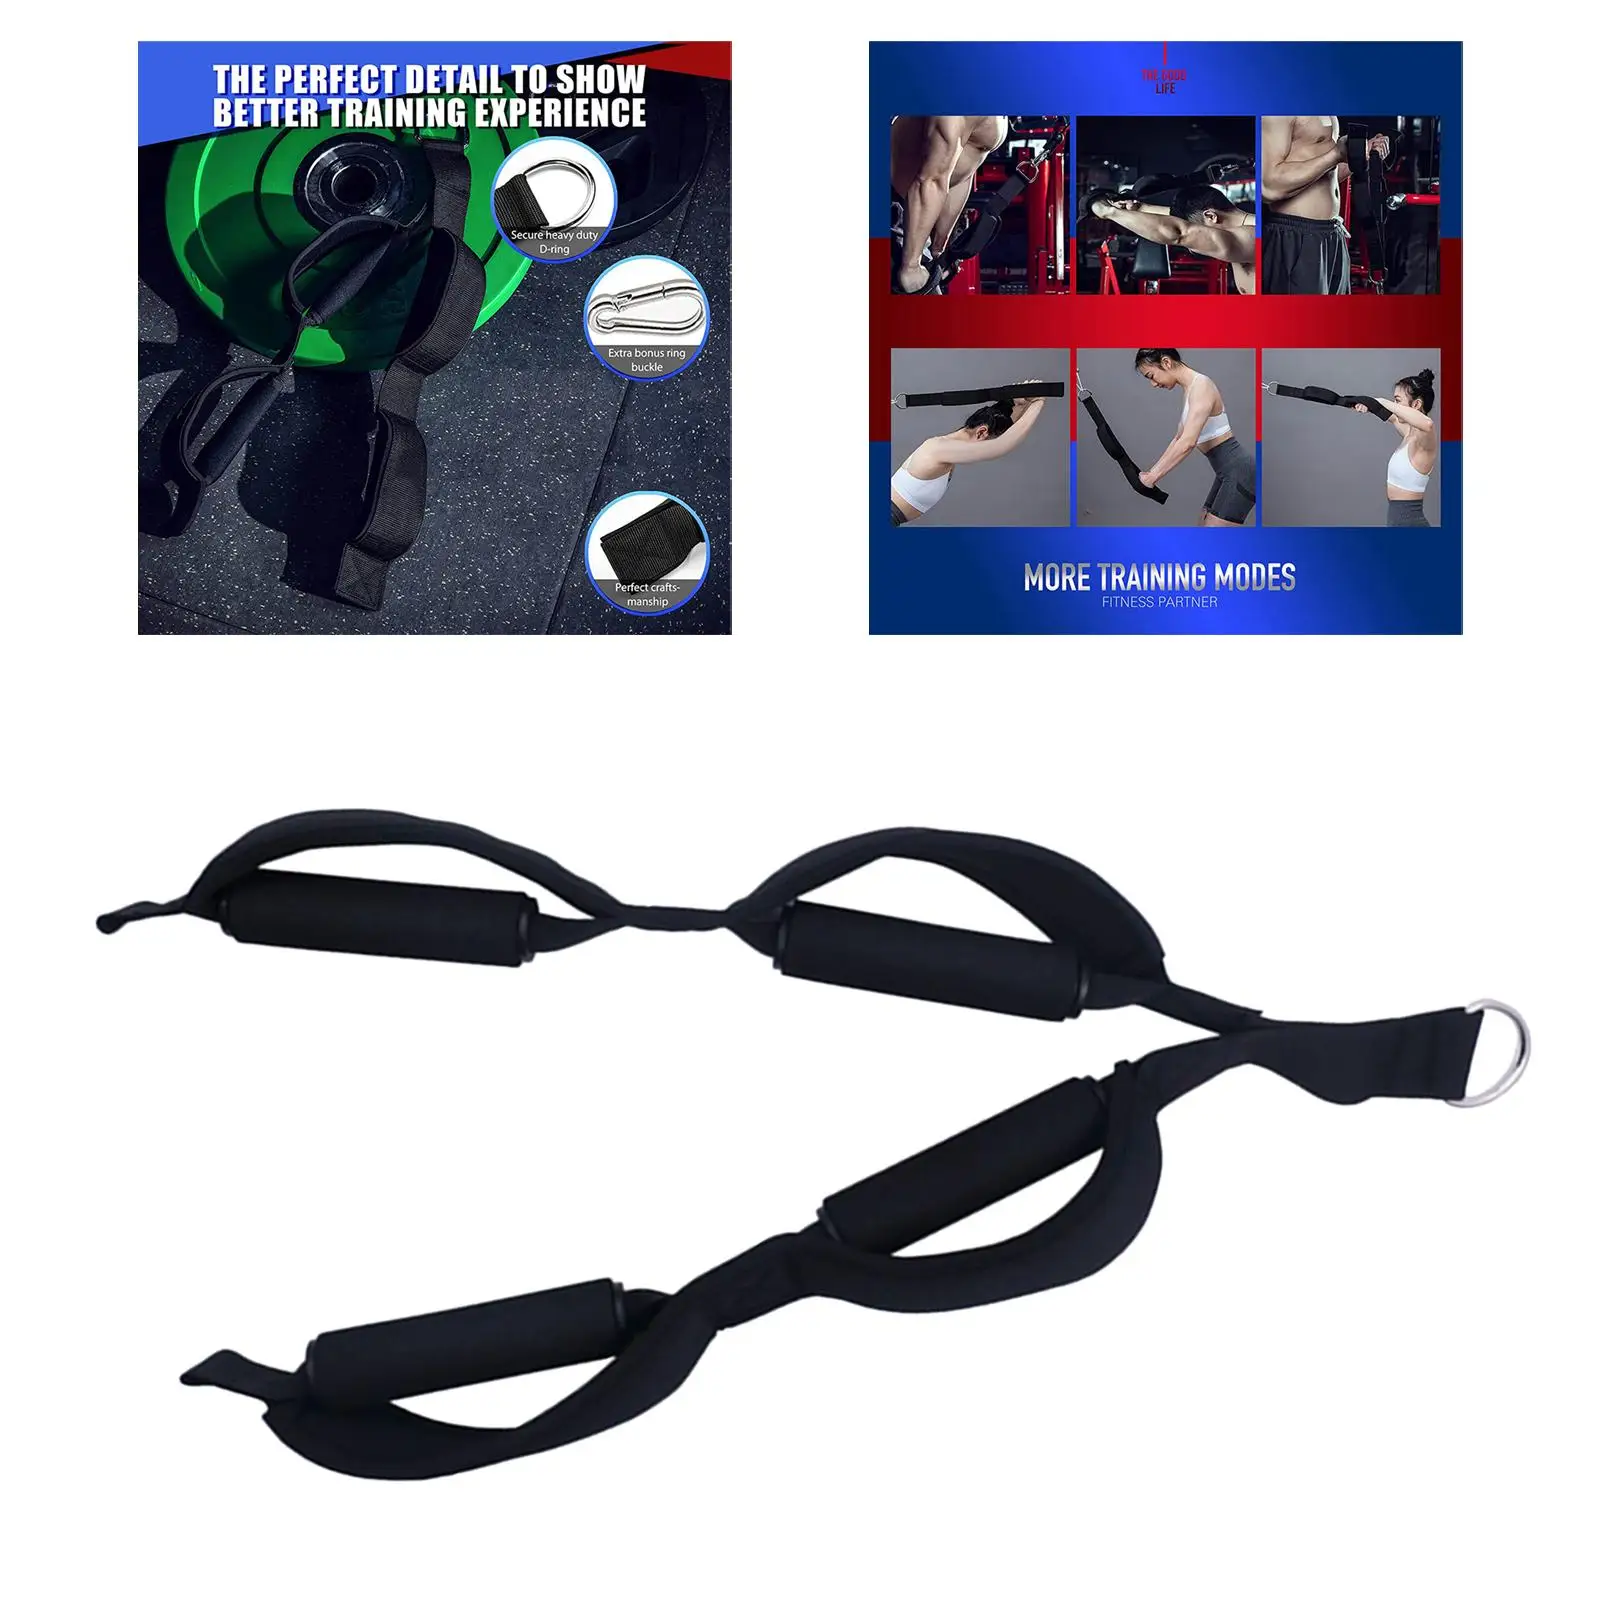 Cable Attachment Tricep Bicep Rope Pully Handles Strap Gym Accessory Equipment